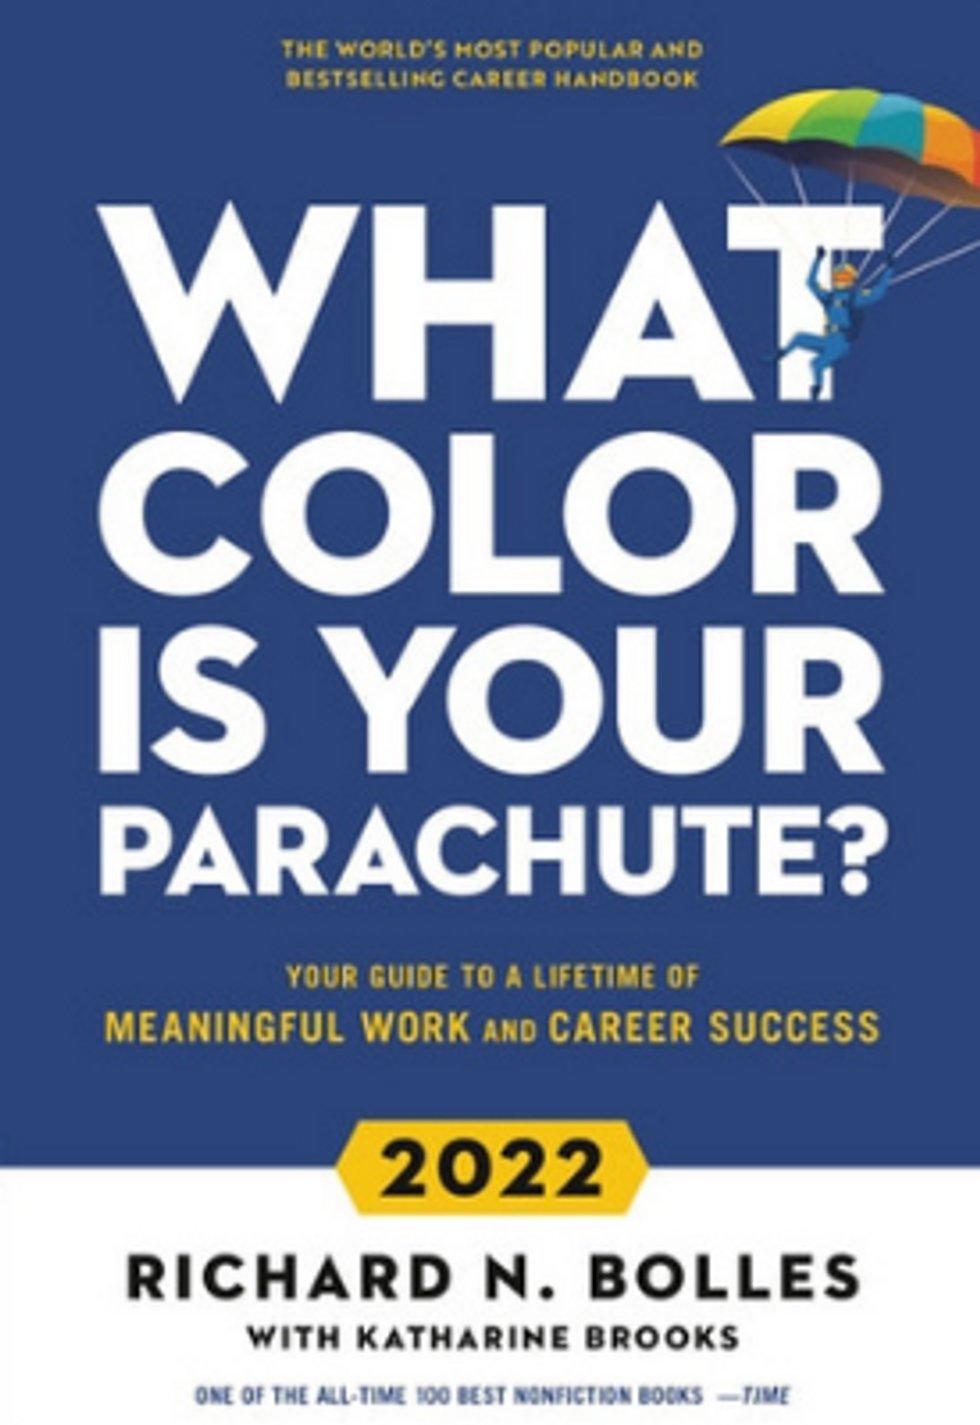 The front cover of the book "What Color Is Your Parachute? A Practical Manual for Job-Hunters and Career-Changers" by Richard Nelson Bolles